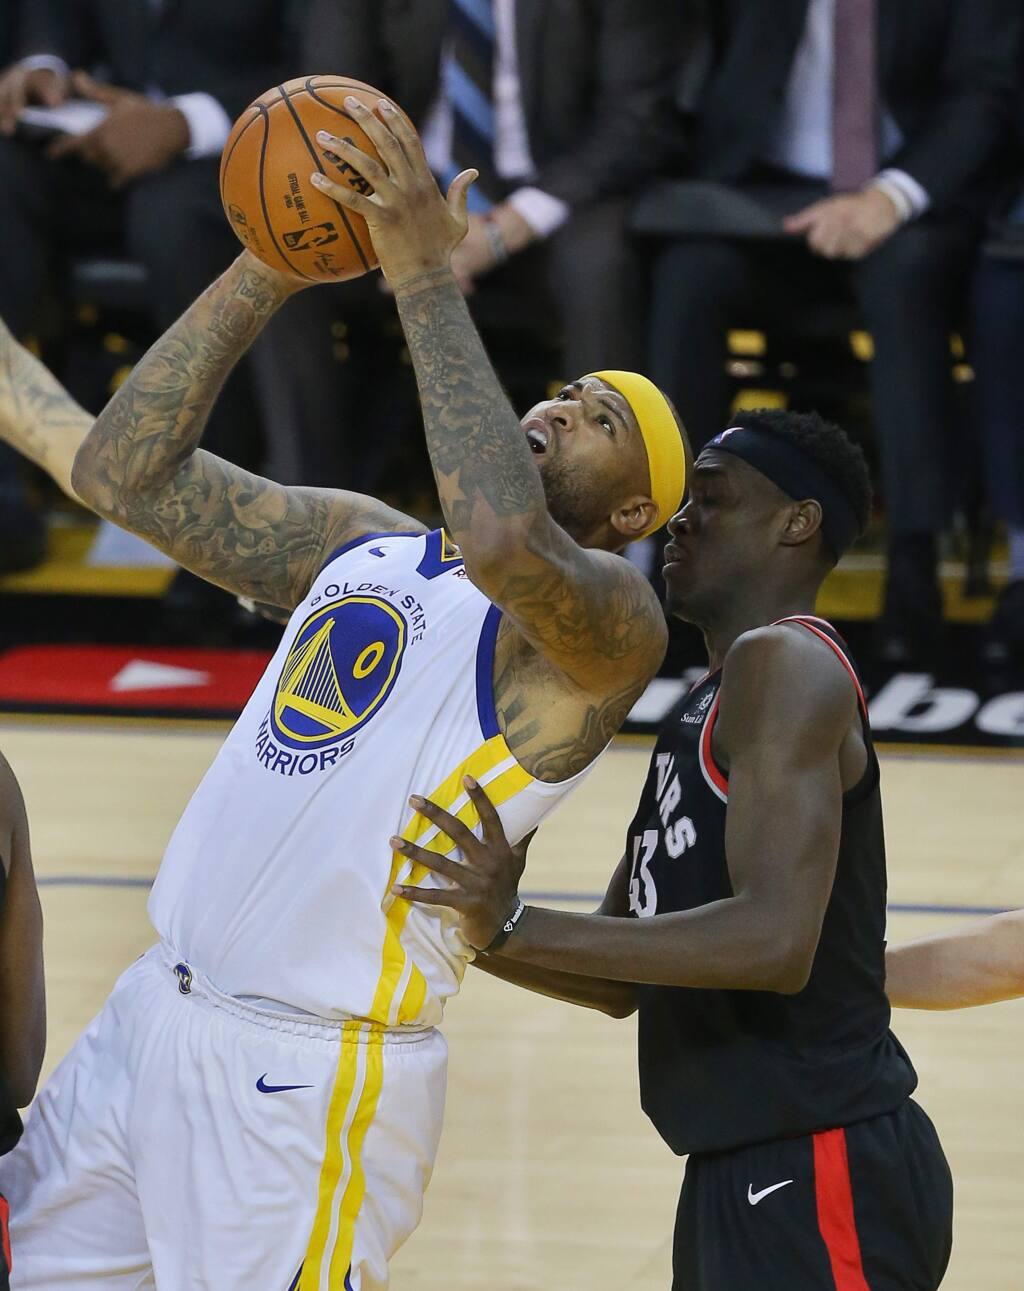 2019 Finals Game 3: Stephen Curry's 47 points not enough to slow